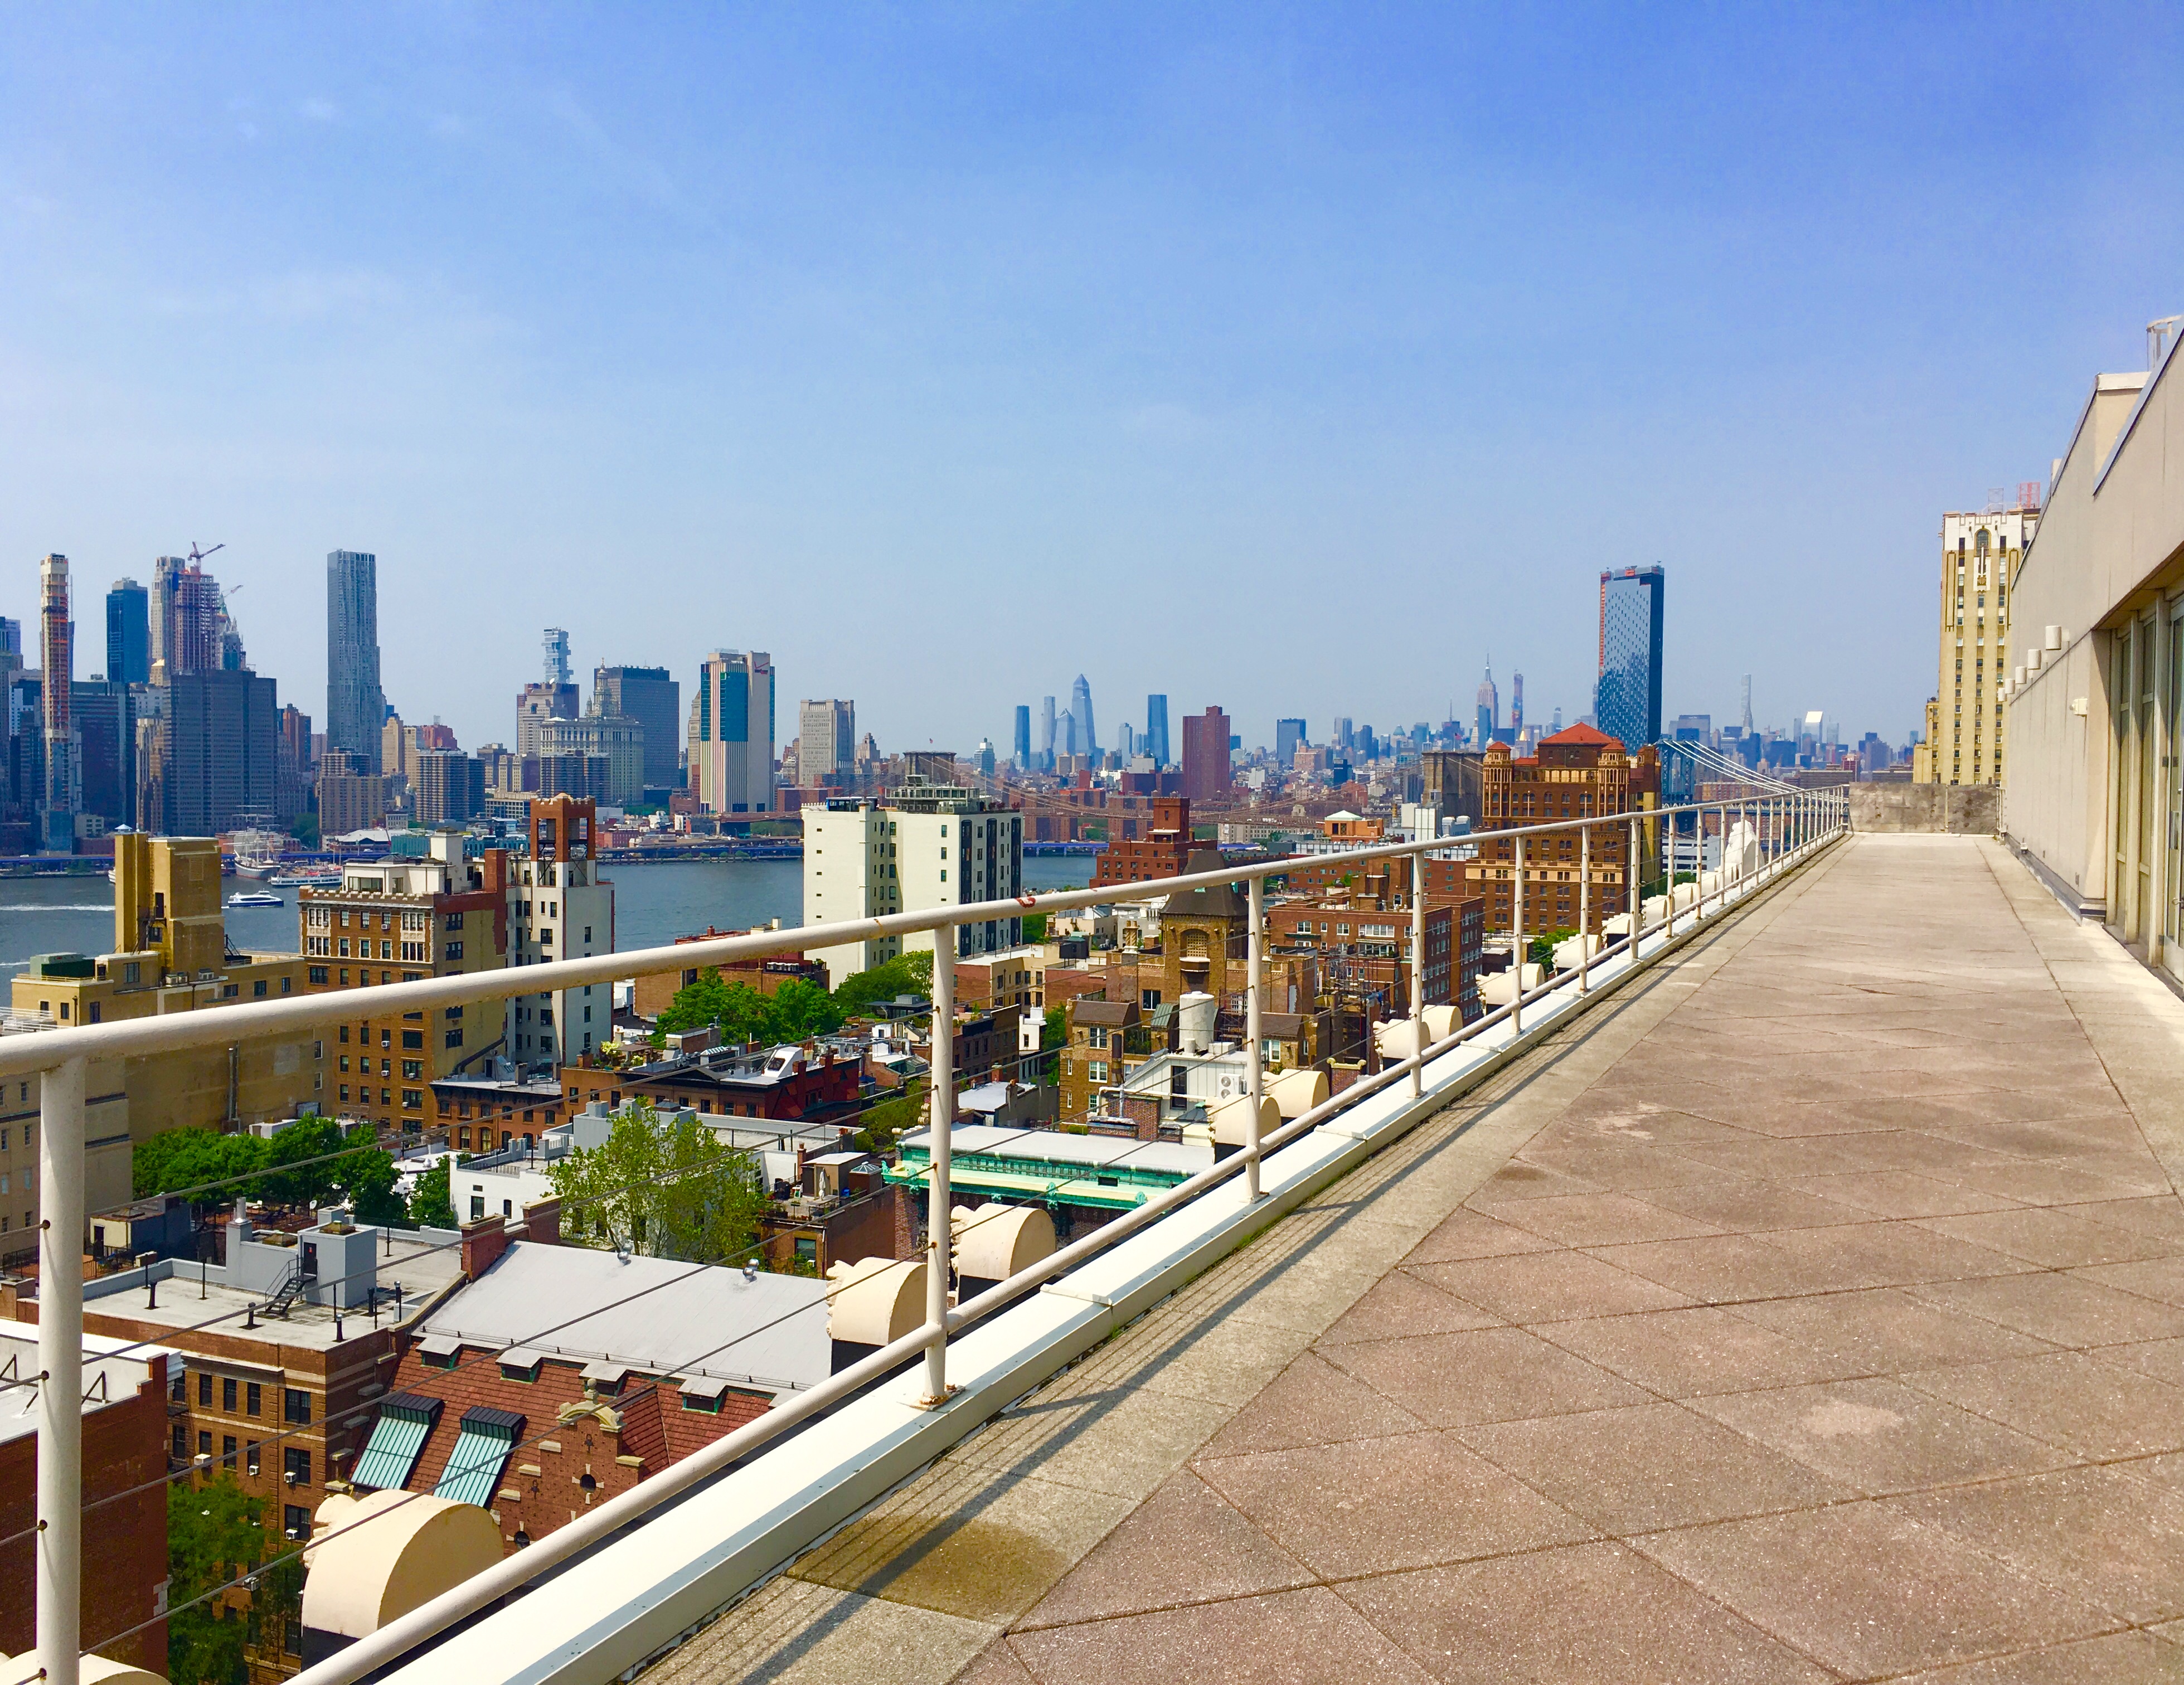 The Hotel Bossert’s 140-foot terrace has an epic view of Brooklyn Heights and Manhattan. Eagle file photo by Lore Croghan